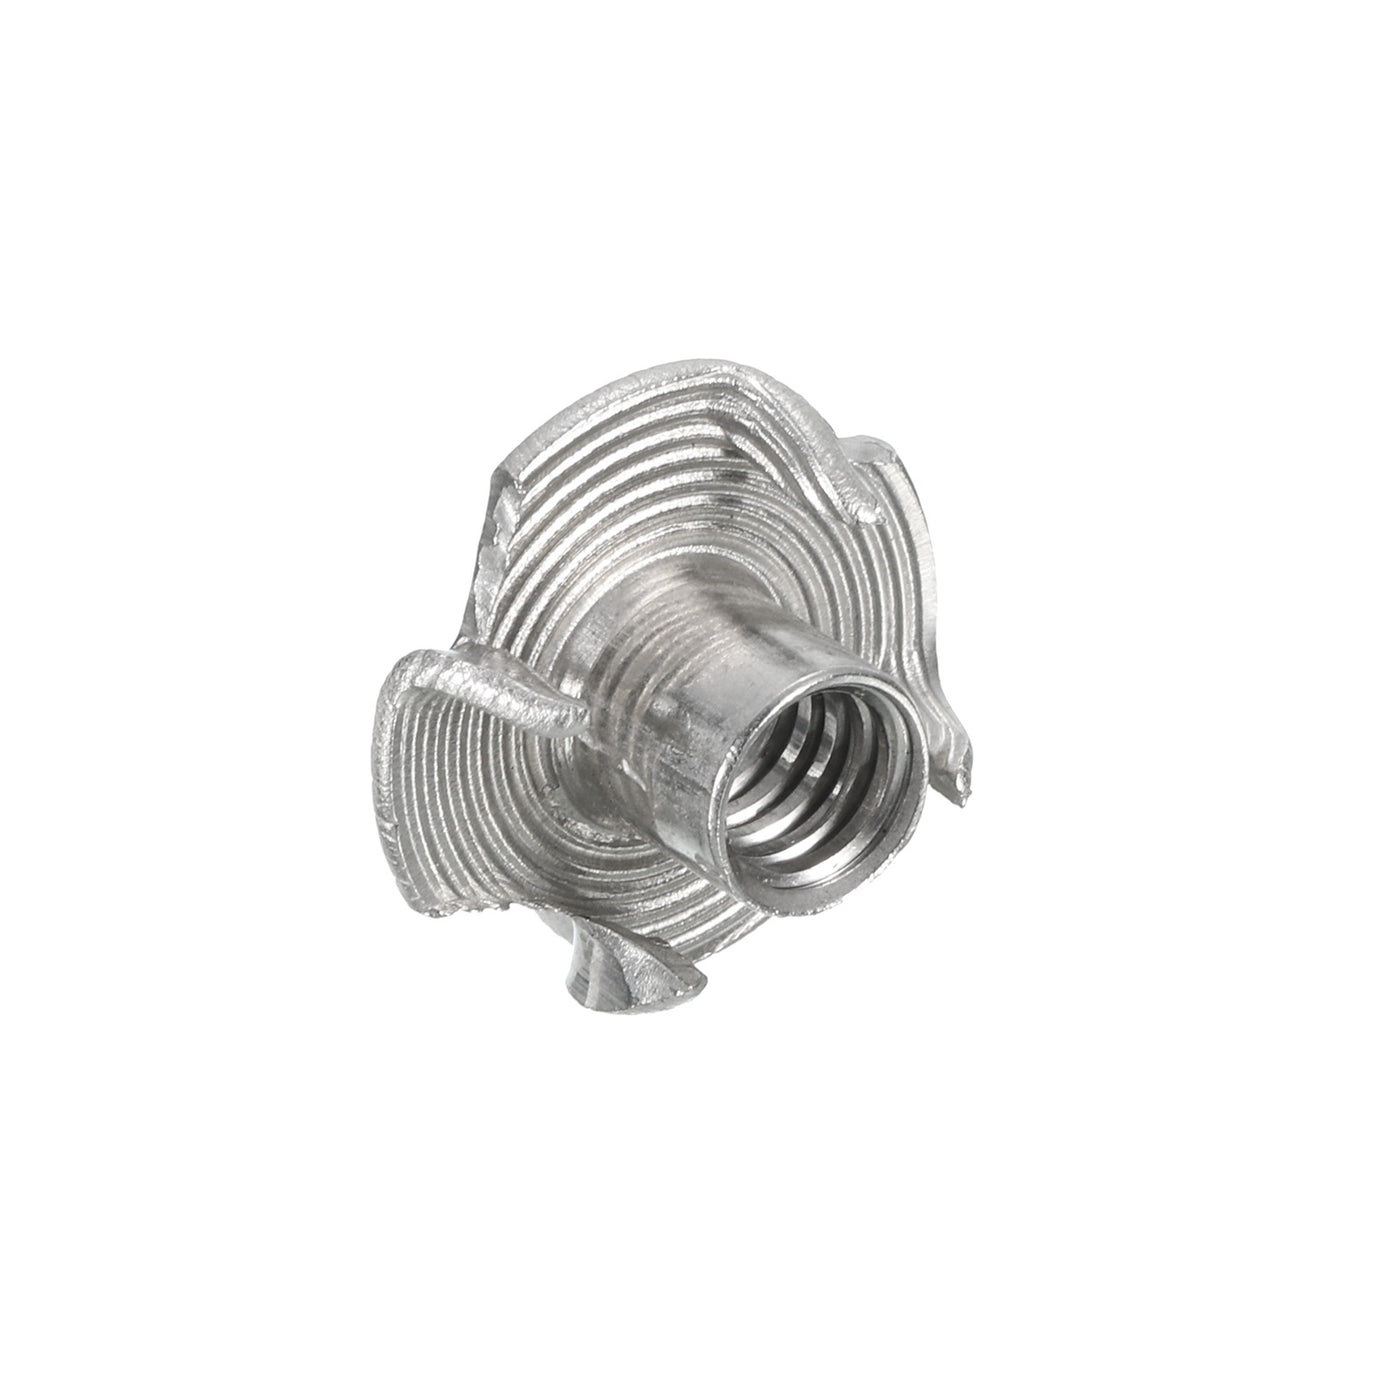 uxcell Uxcell 1/4"-20 T-nut 50pcs 304 Stainless Steel 4 Pronged Tee Nuts Threaded Insertion